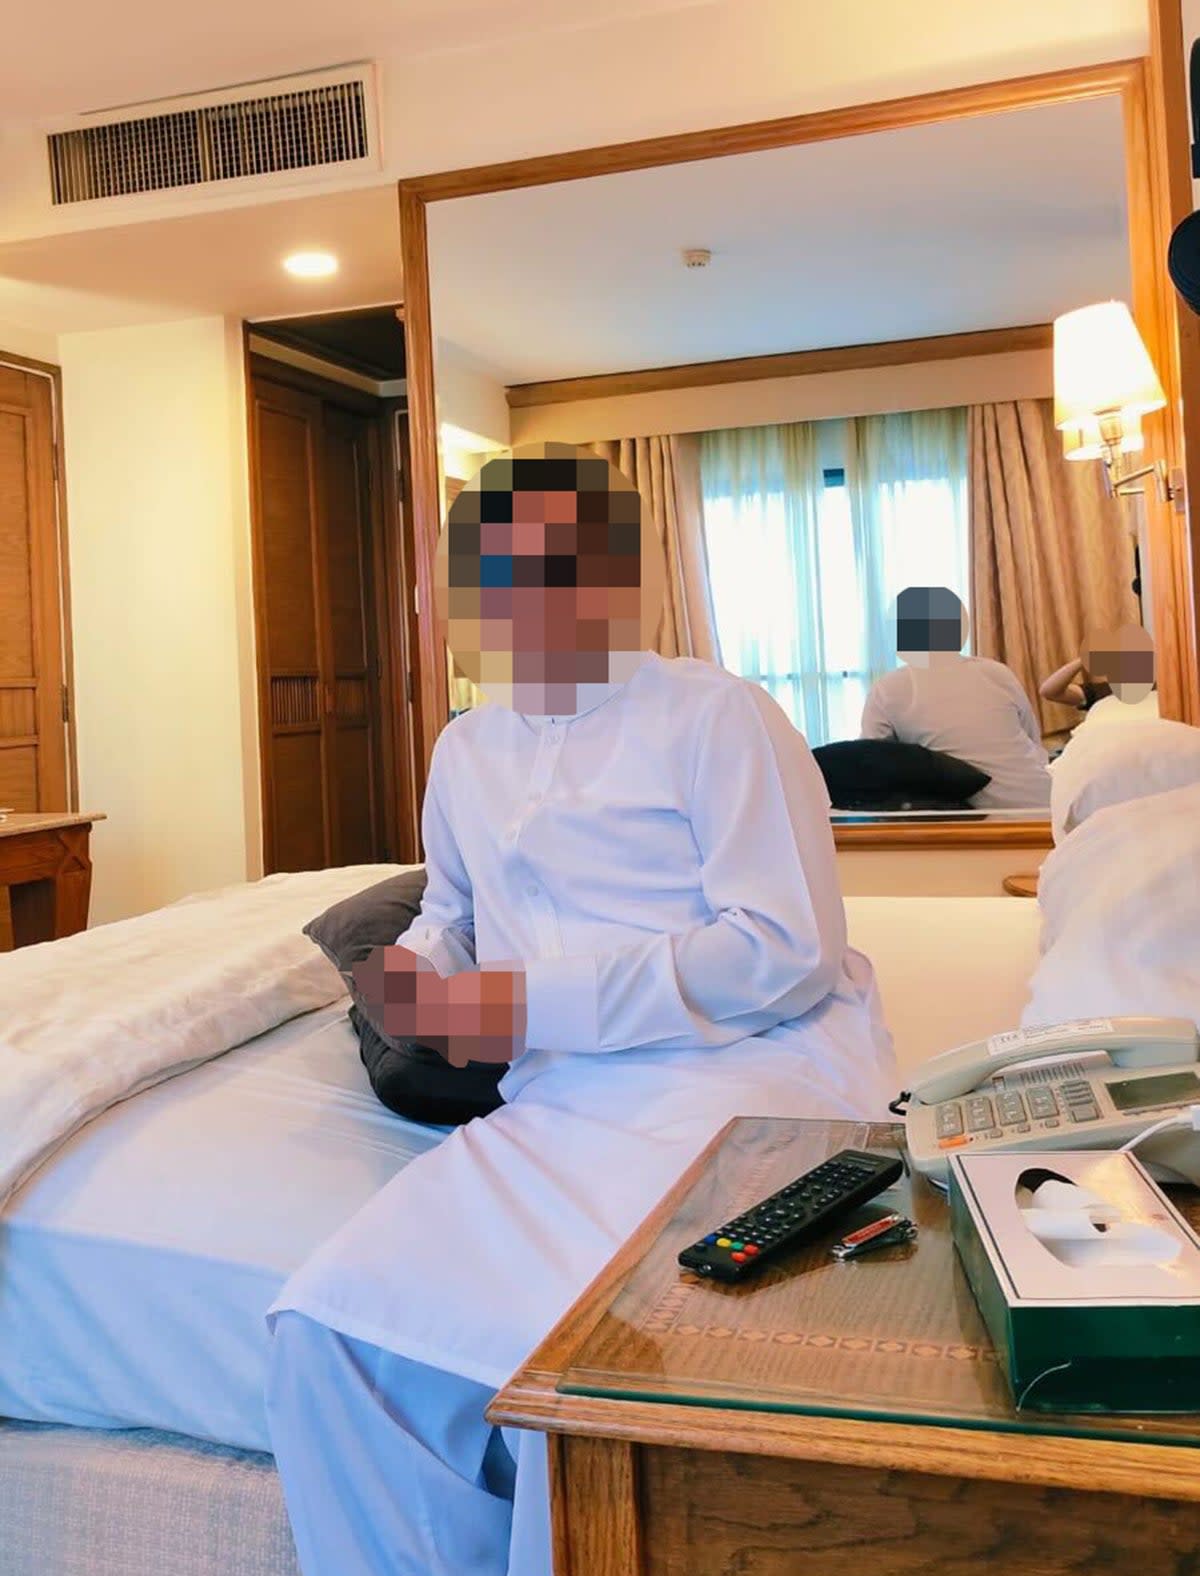 One former interpreter describes his year-long hotel stay as ‘like being in jail’ (The Independent)